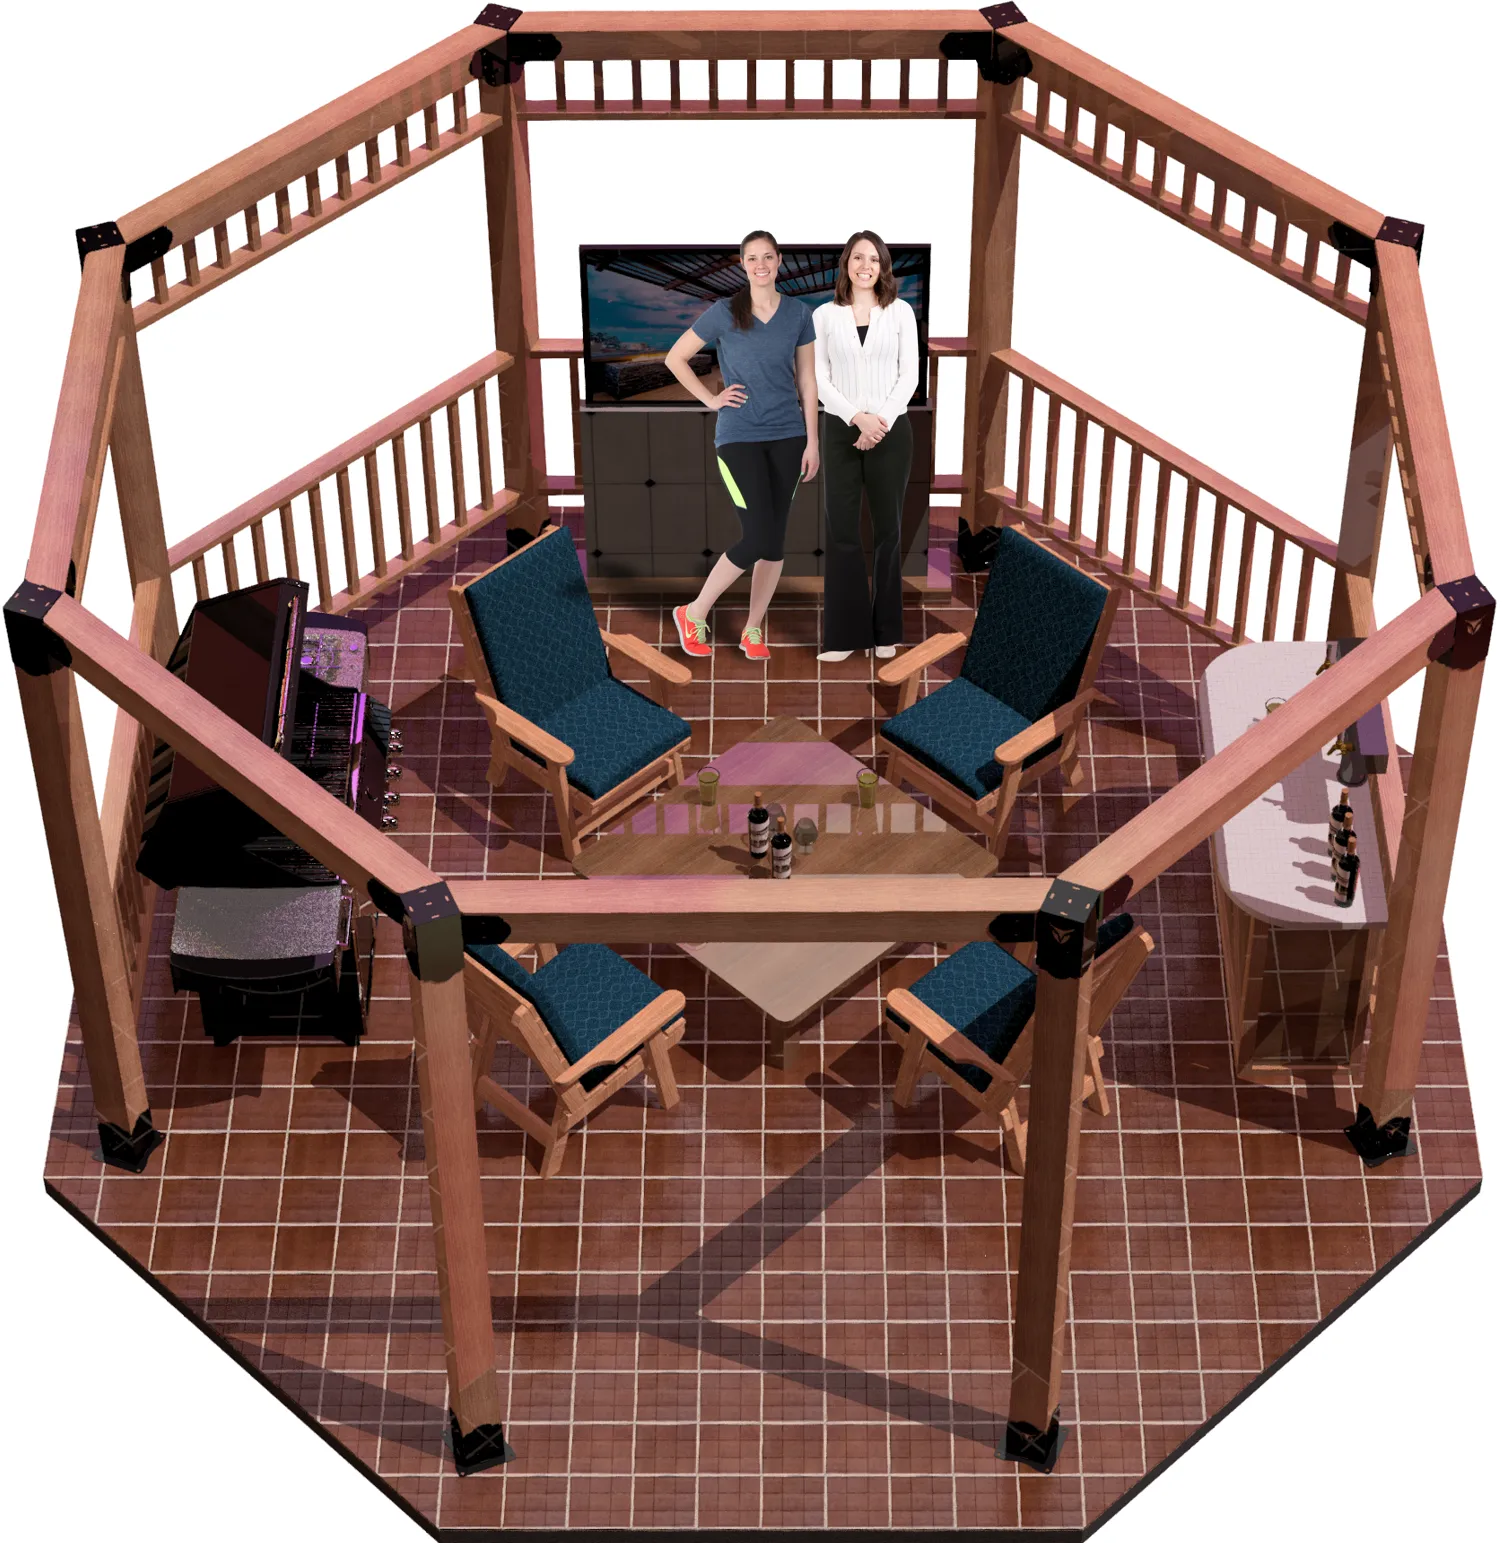 view of a DIY 6X6 open top octagon pergola. A bar with beer taps & wine bottles, barbecuer, LED TV, and casual furniture inside and two girls standing and smiling inside it.